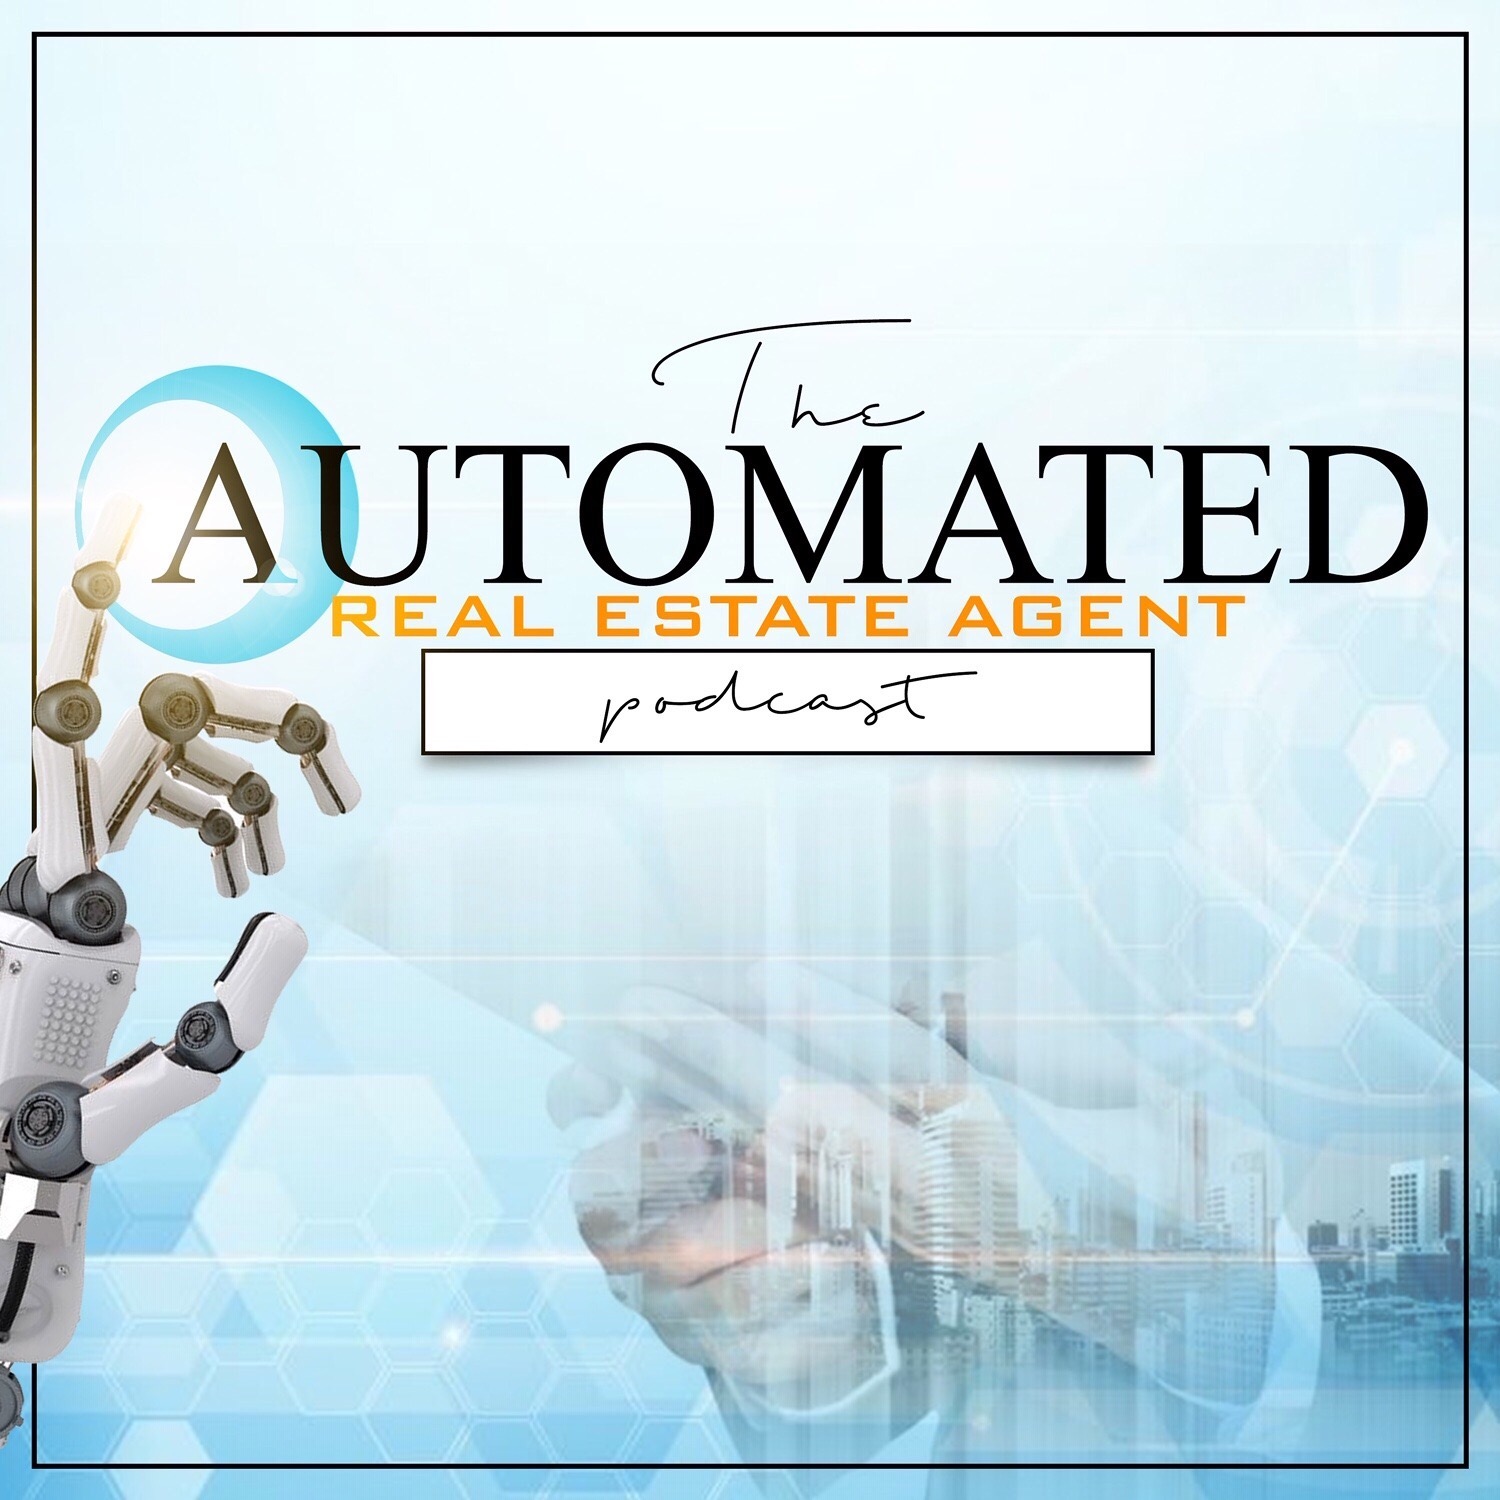 The Automated Real Estate Agent